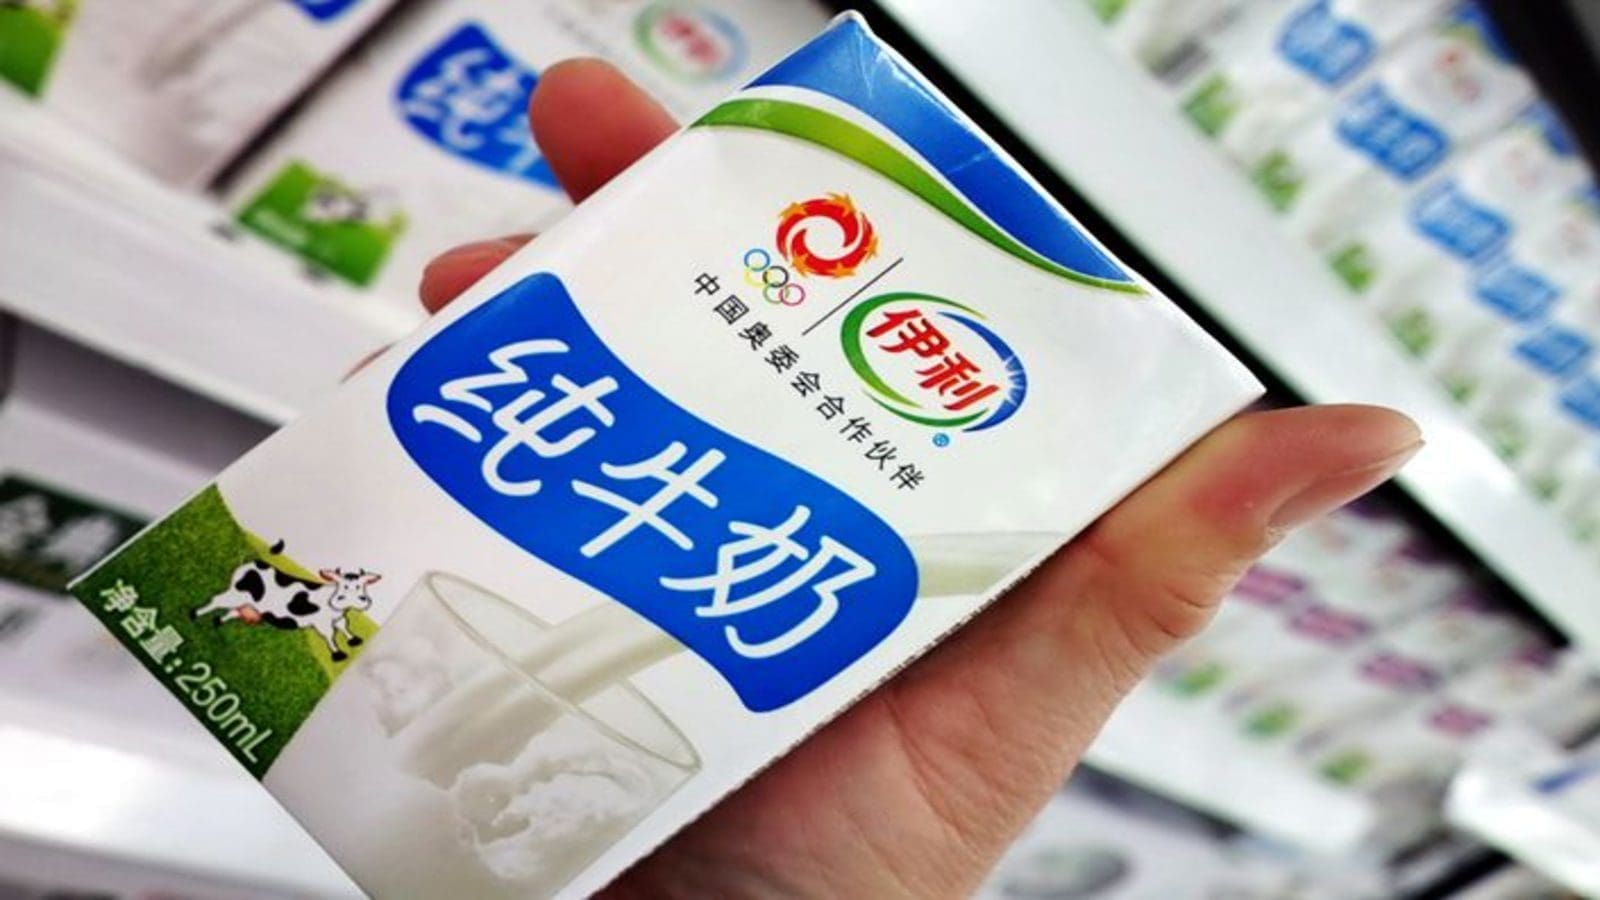 Yili group full-year profits rise to US$16.7B boosted by the focus on innovation